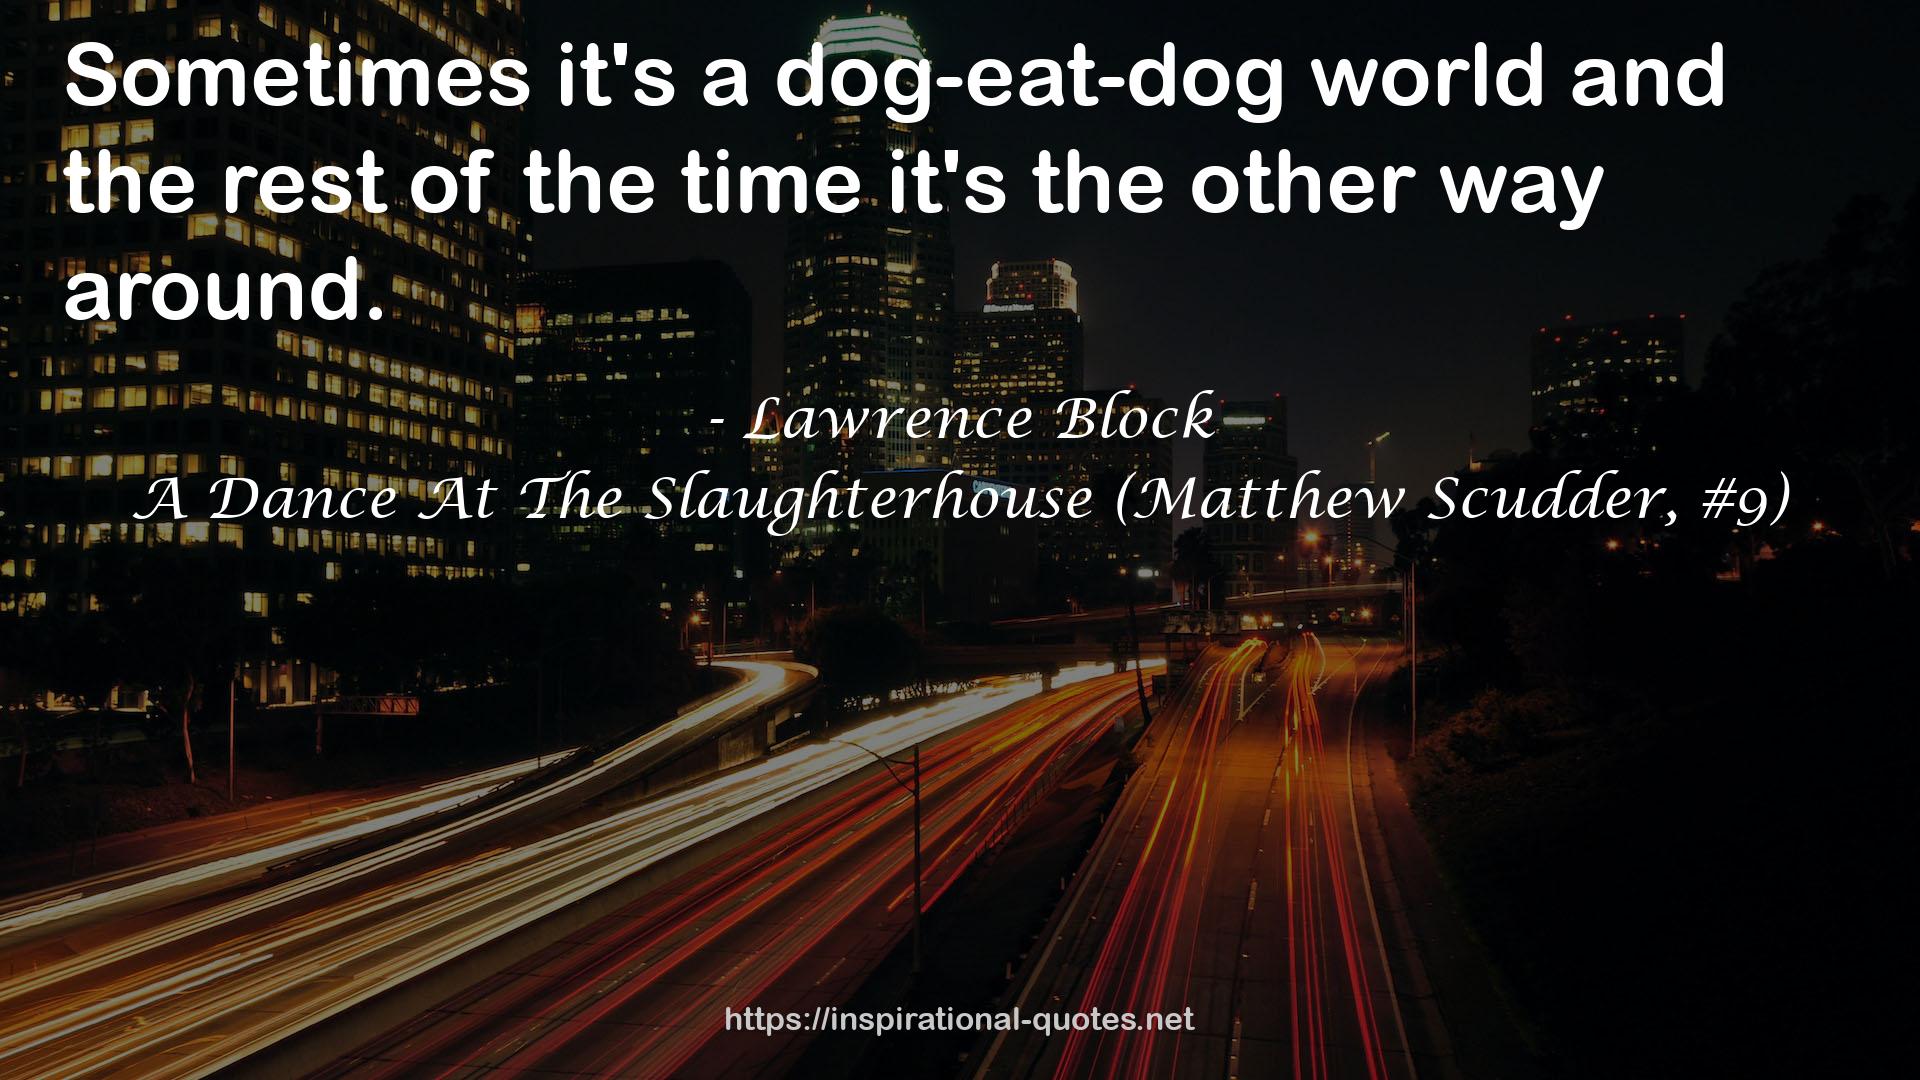 A Dance At The Slaughterhouse (Matthew Scudder, #9) QUOTES